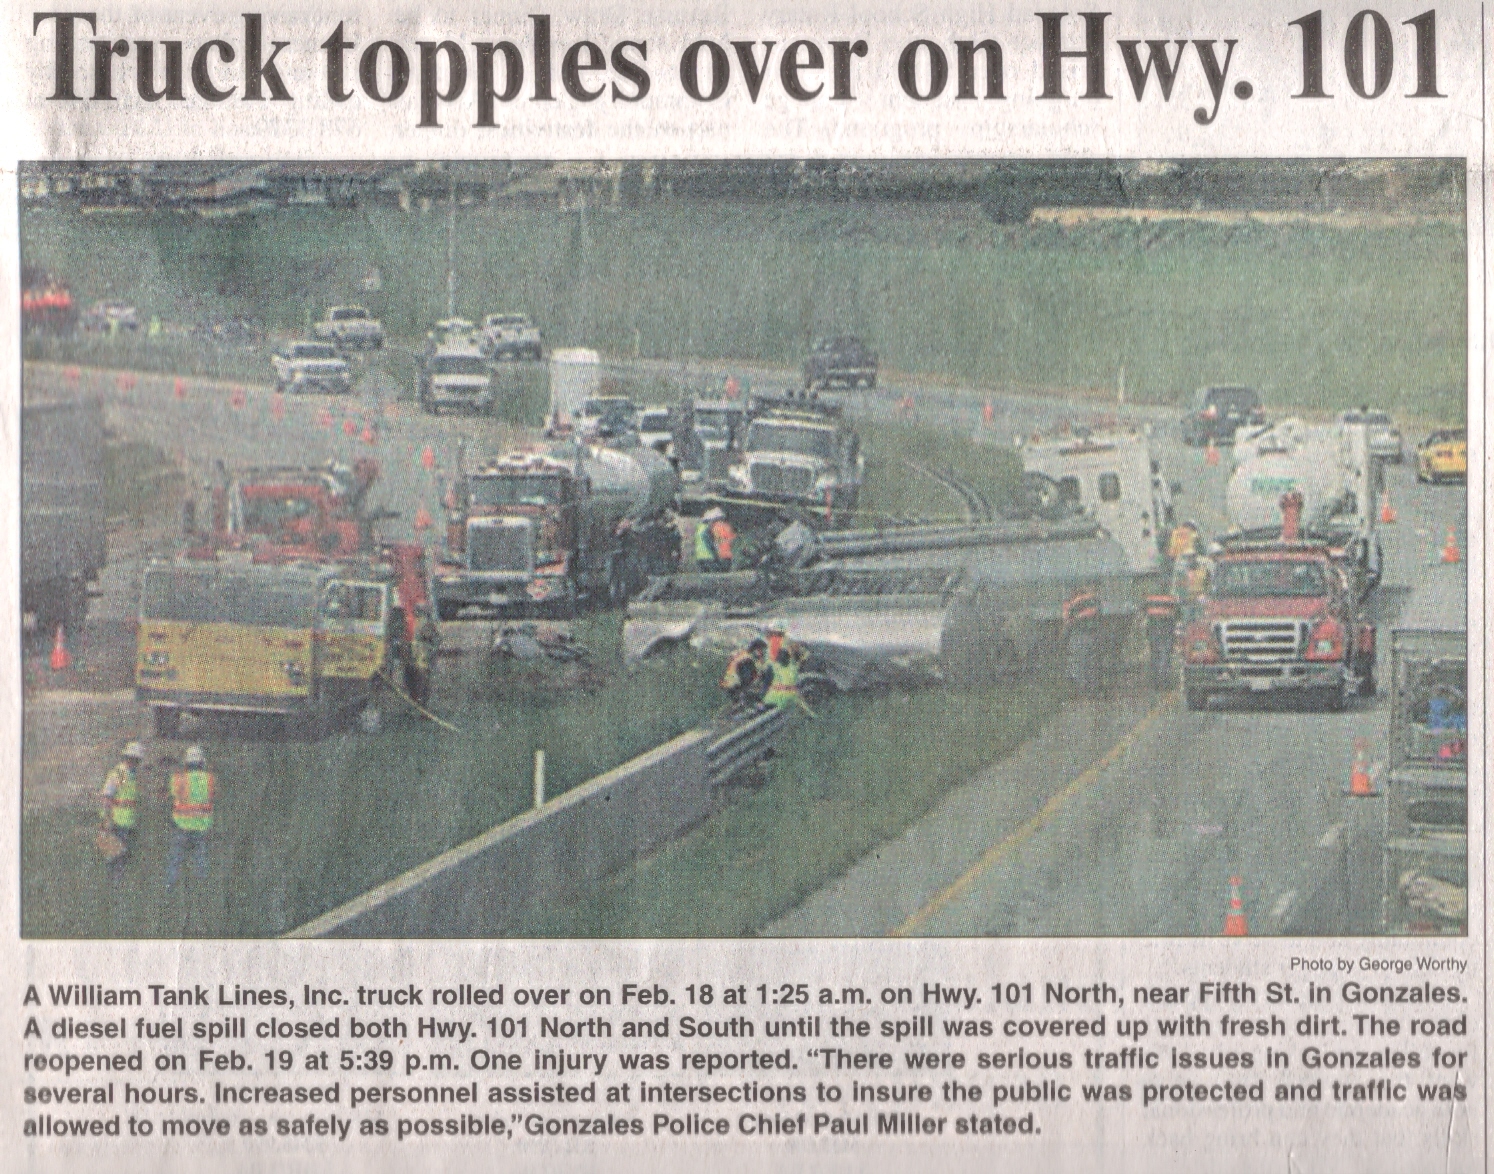 newspaper clipping of a diesel tank truck rolled over on US101 near Fifth St